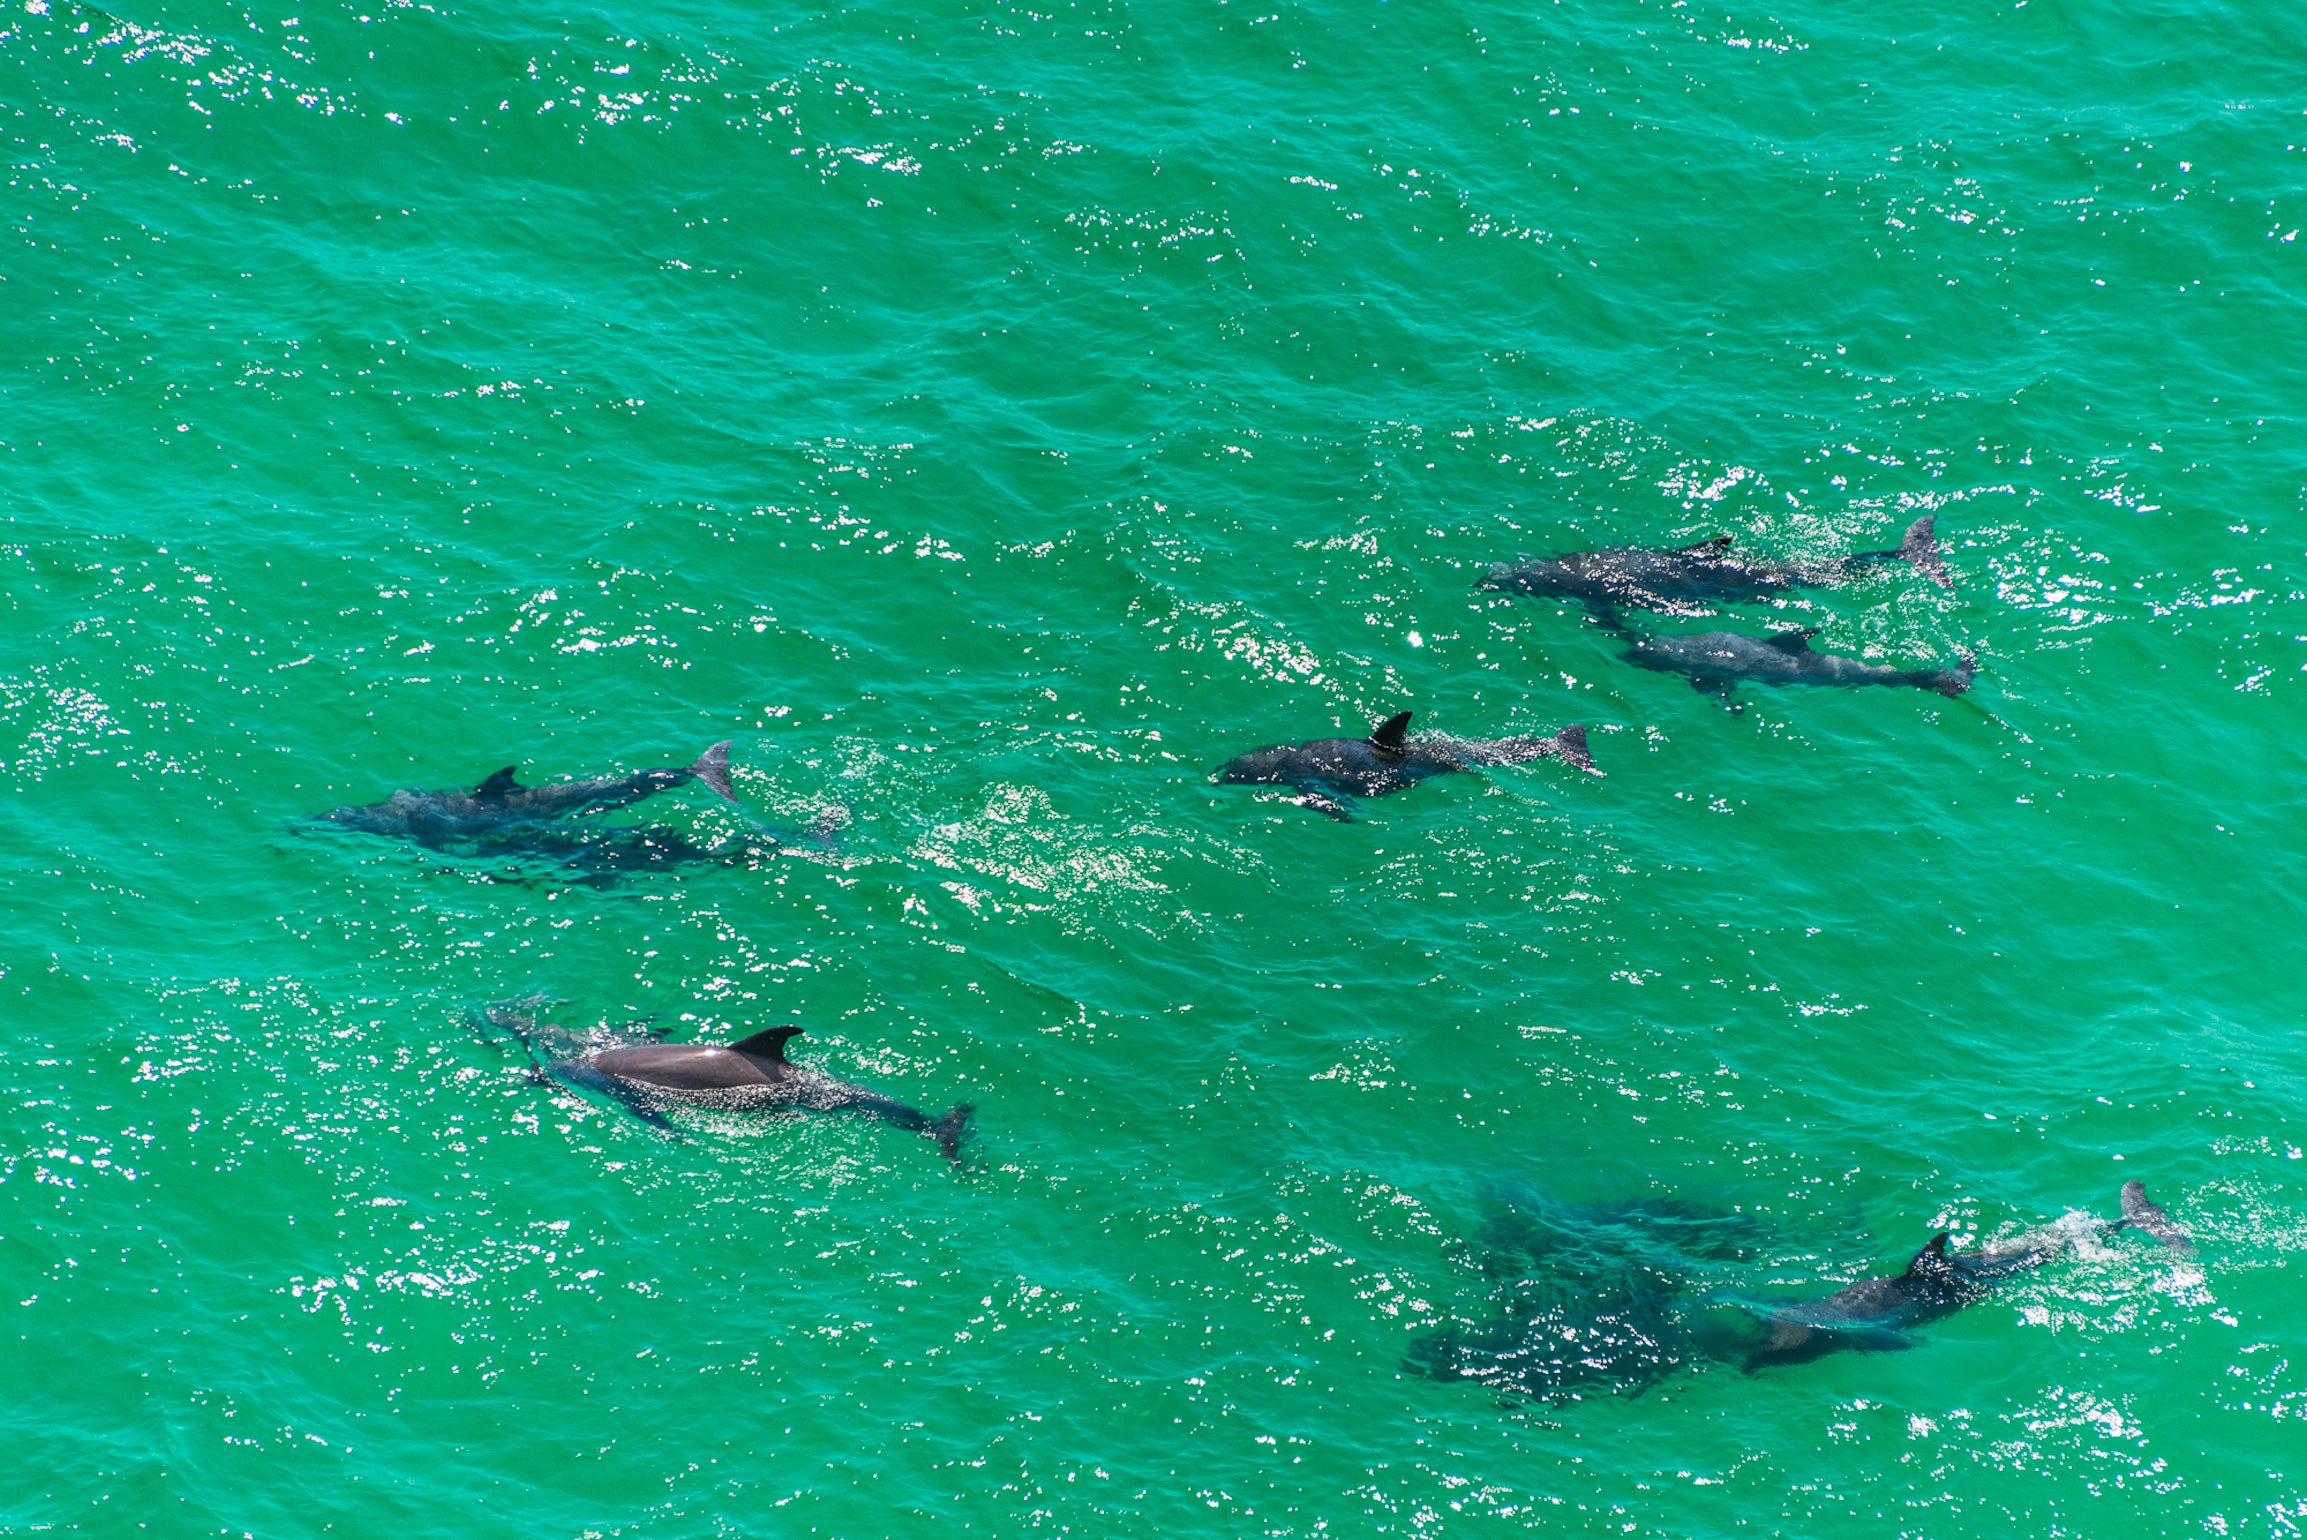 Dolphins+at+play+in+our+Gulf+waters